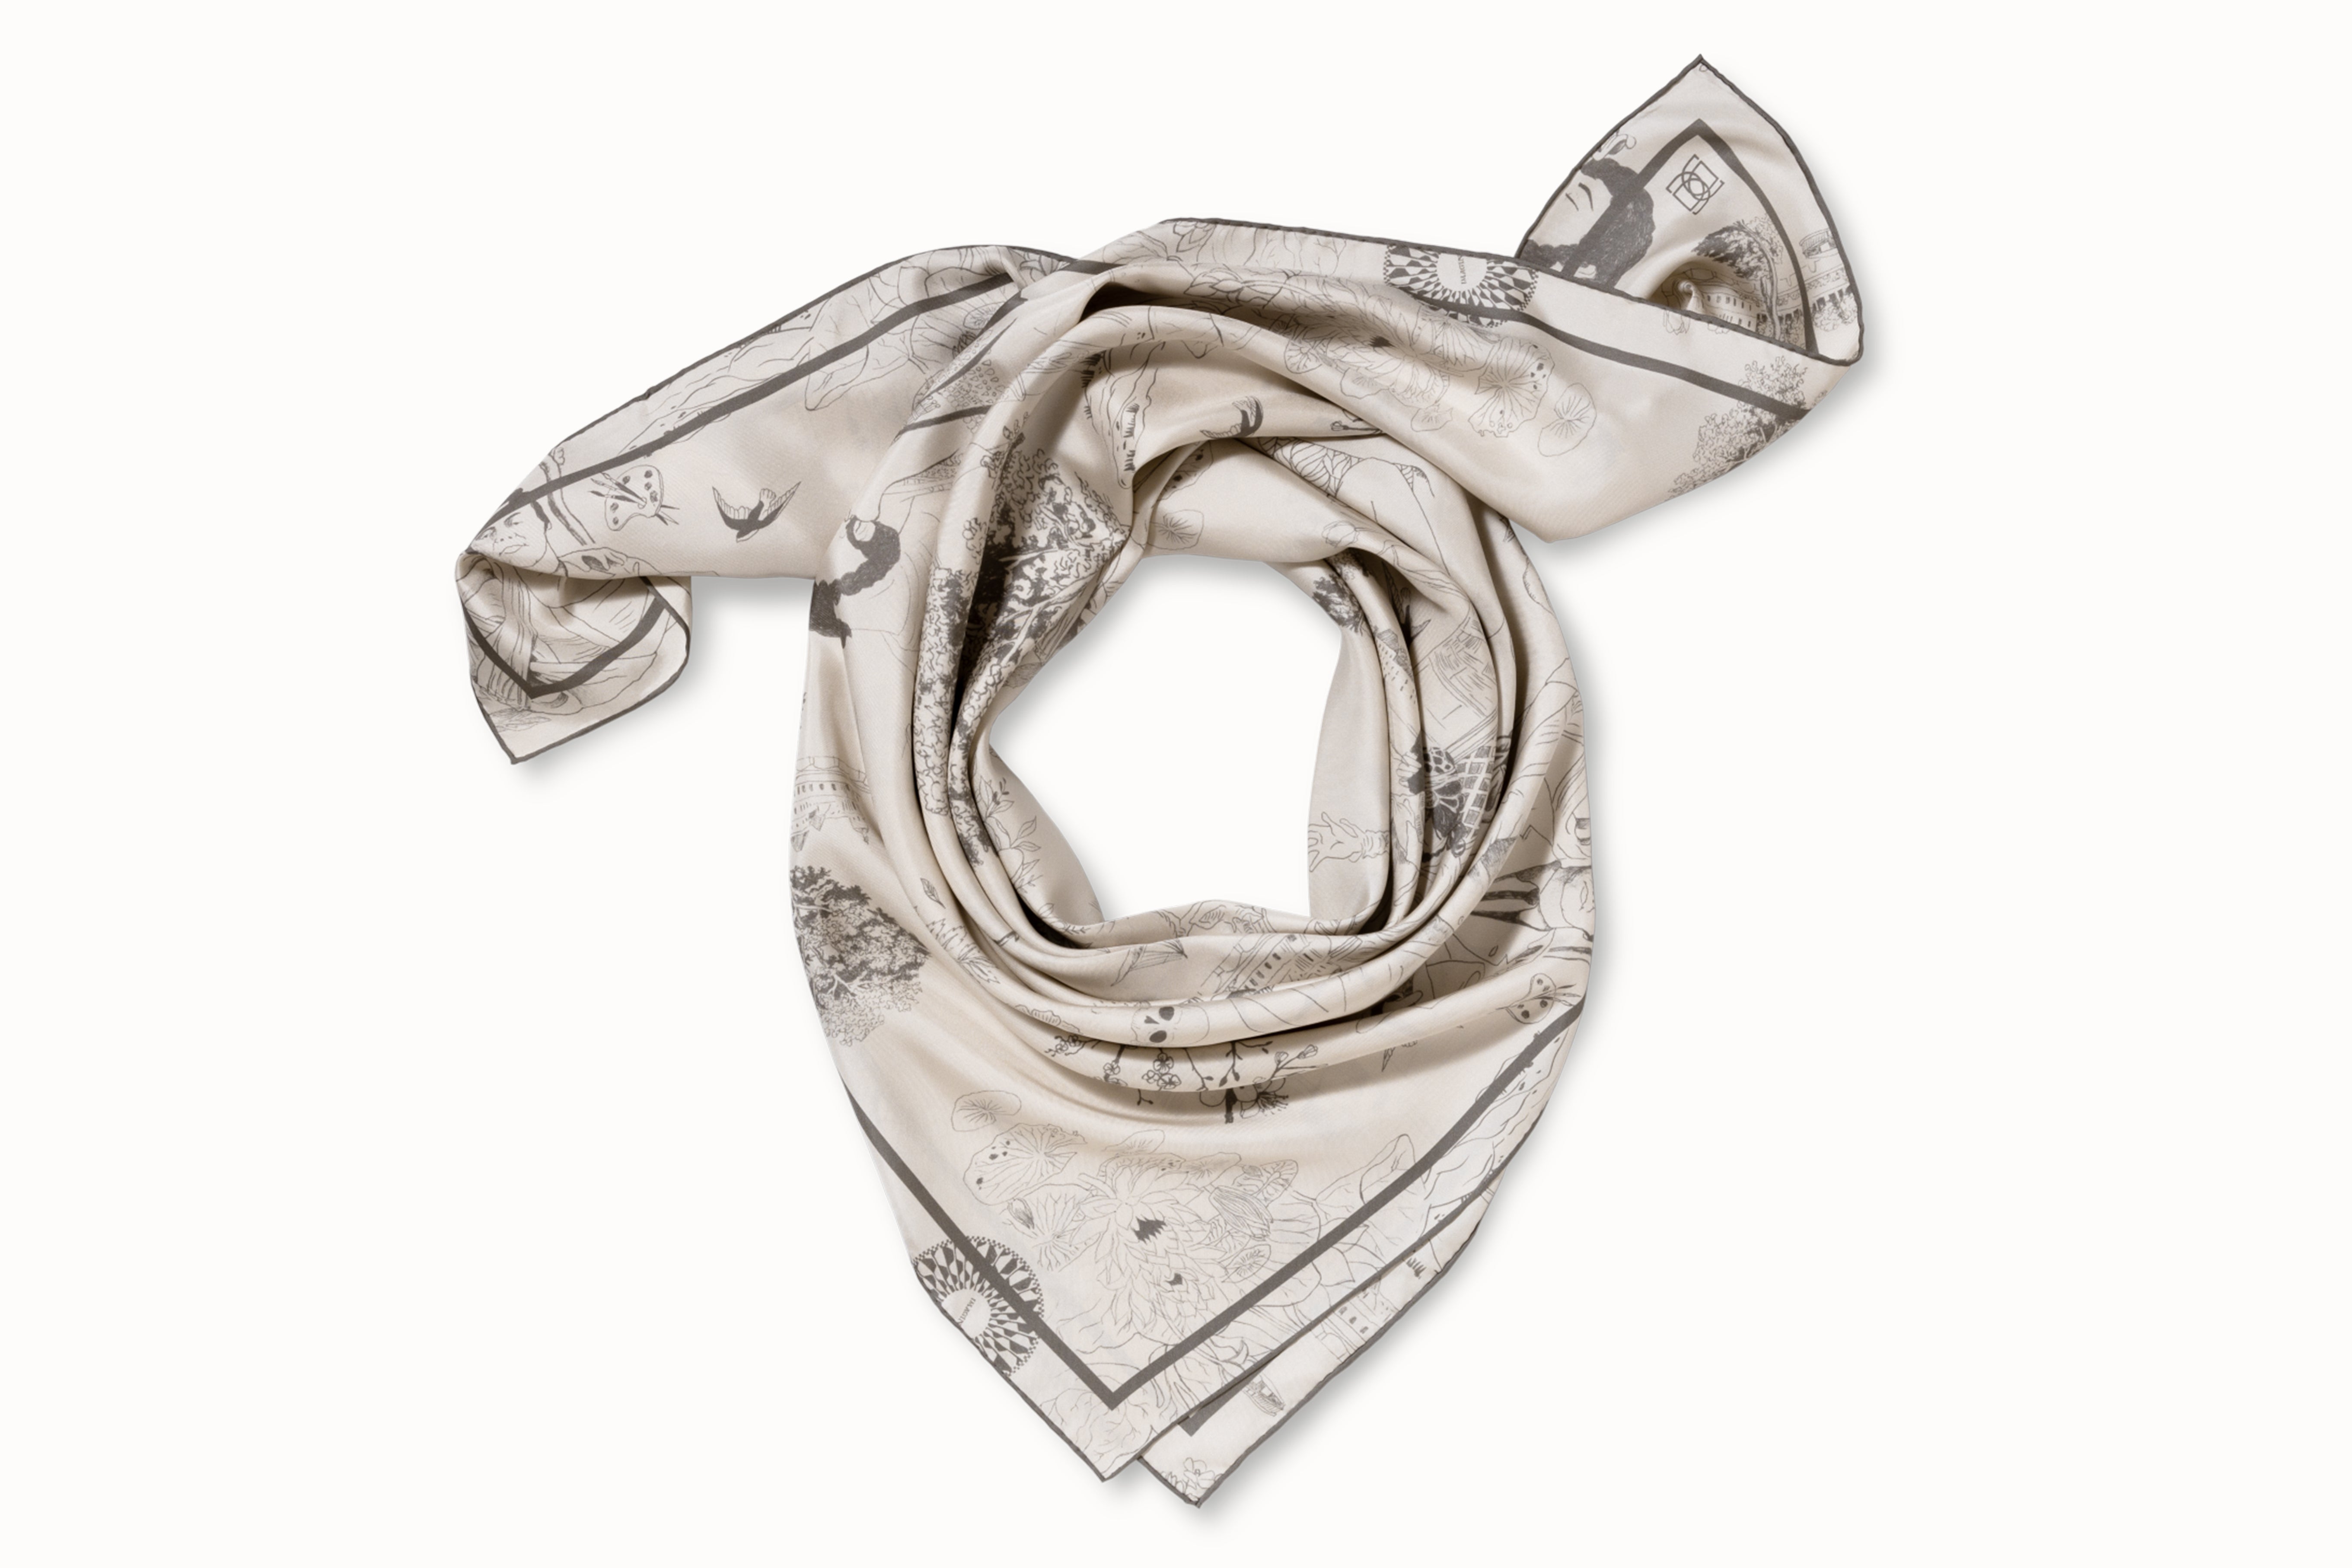 Modern Love scarf in Pewter, rolled